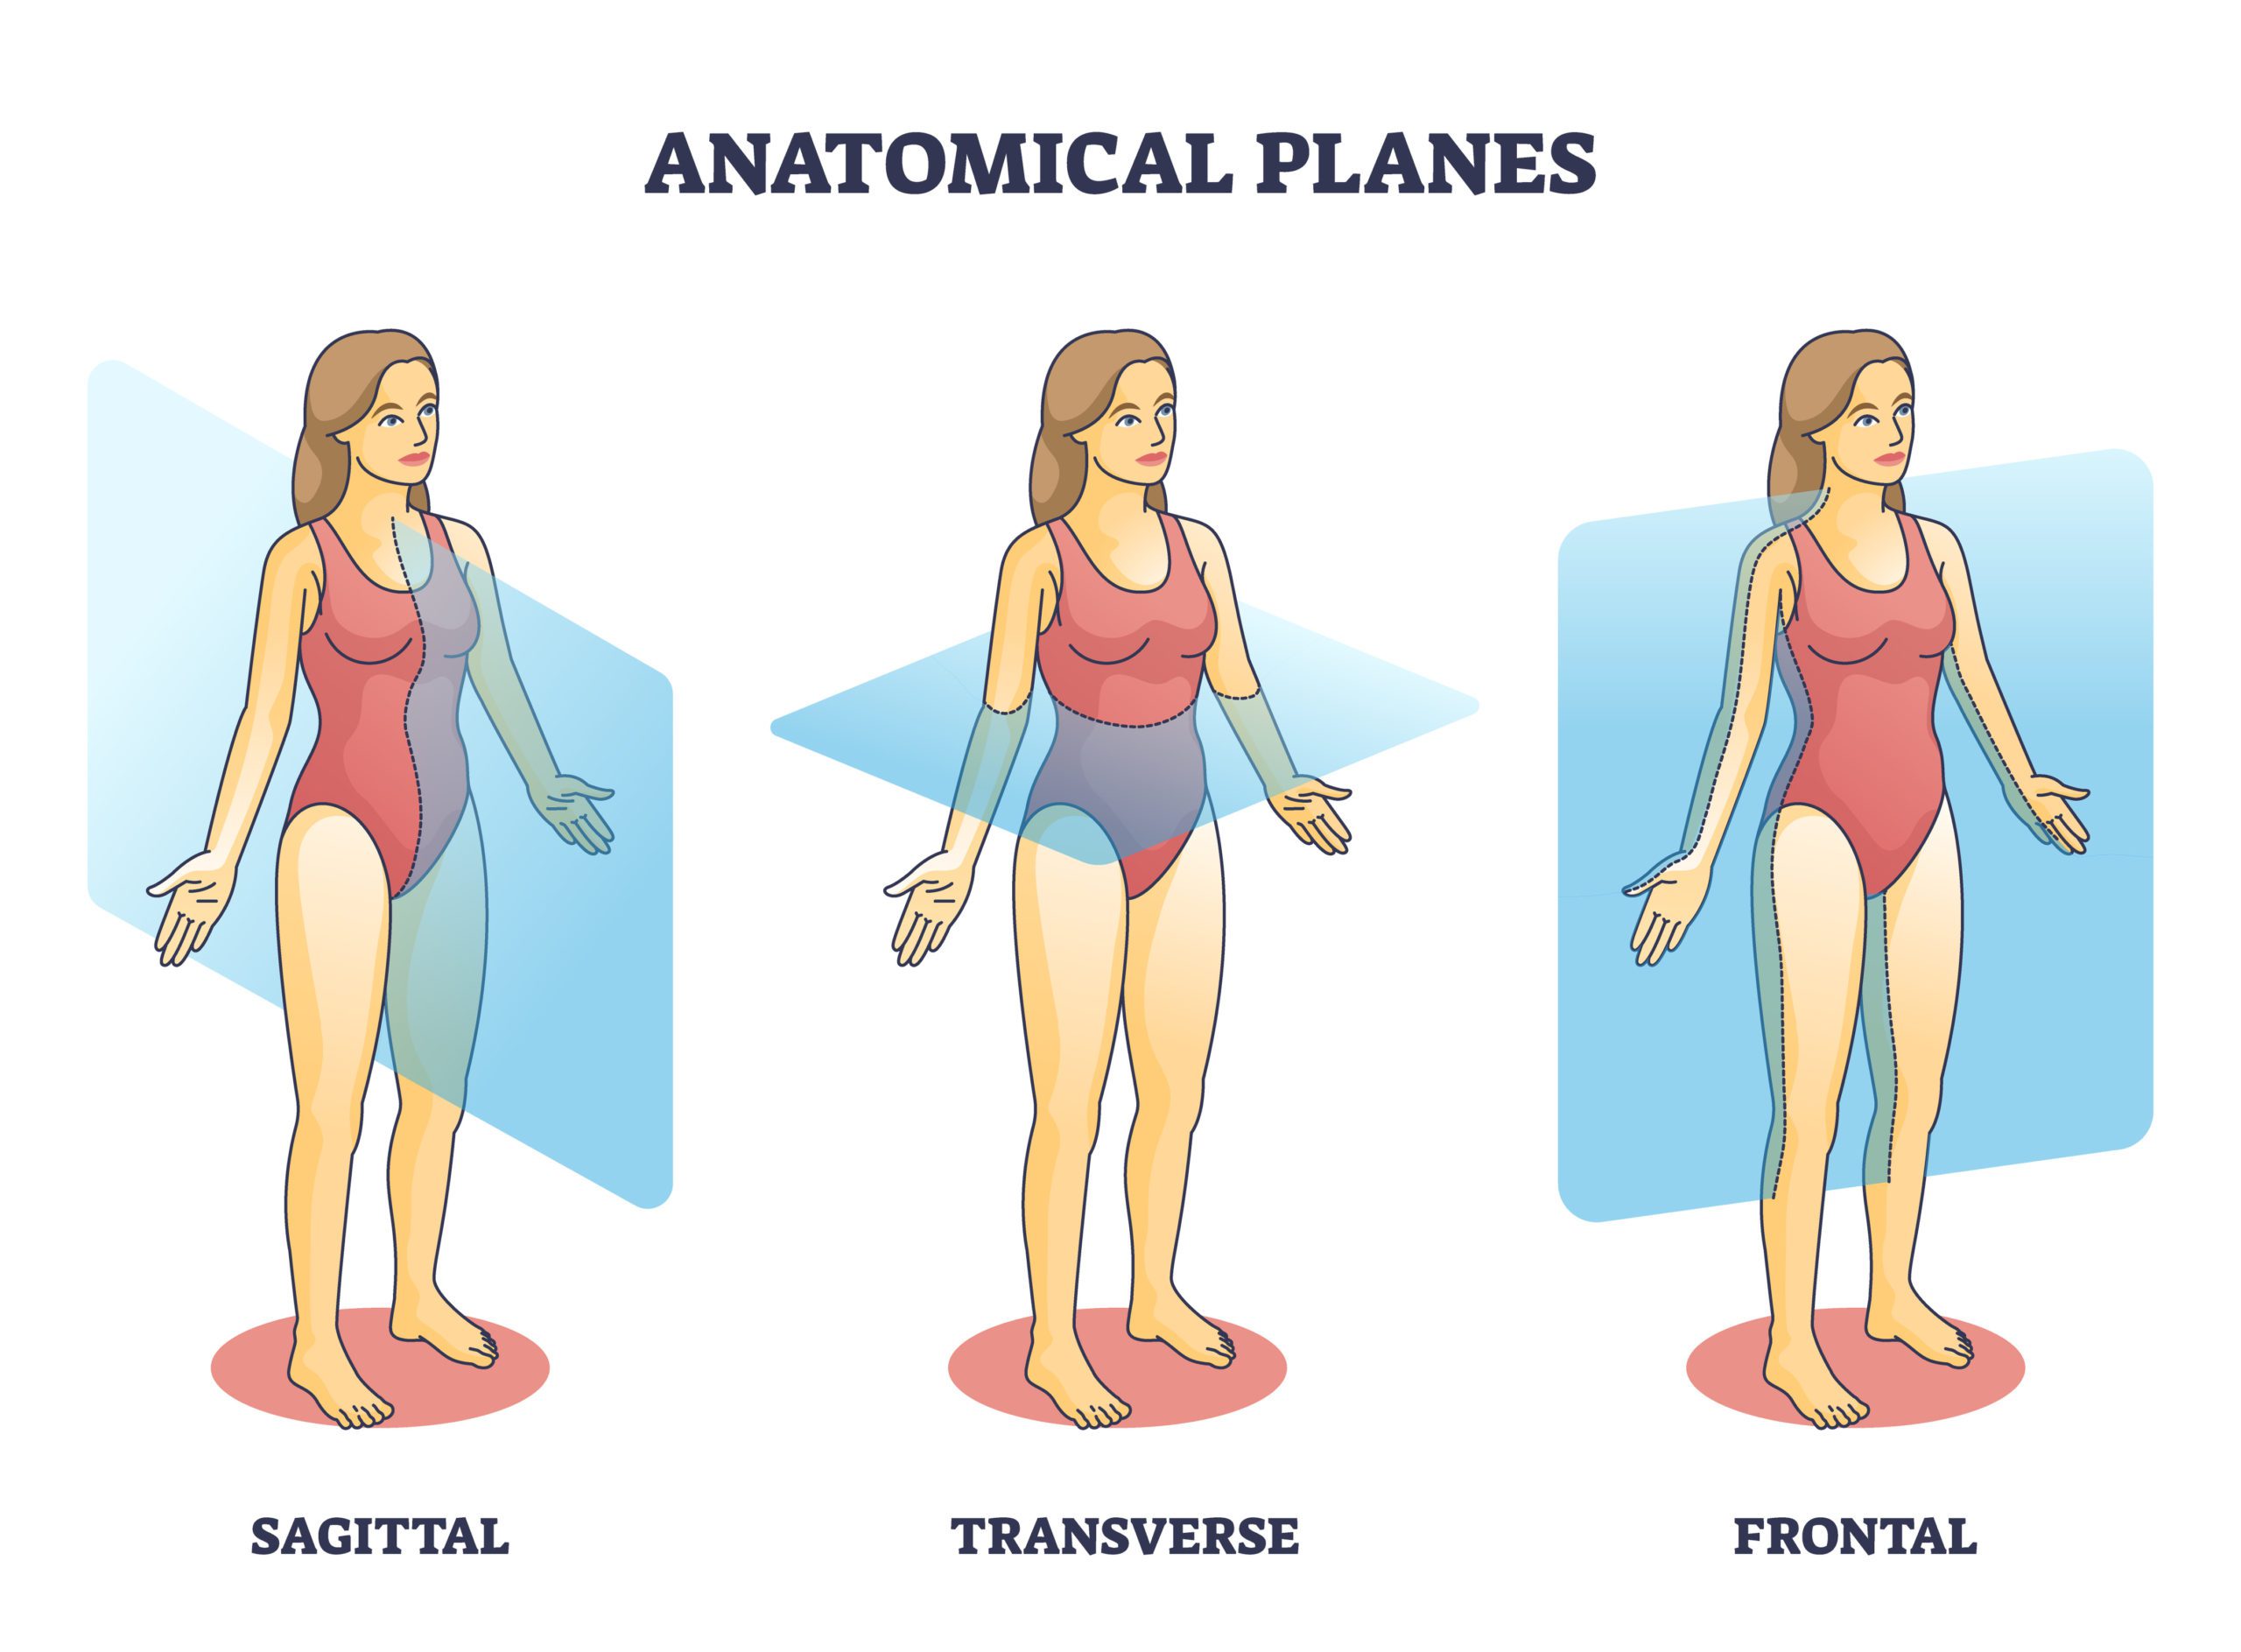 Anatomical planes examples for medical human body transection outline diagram.